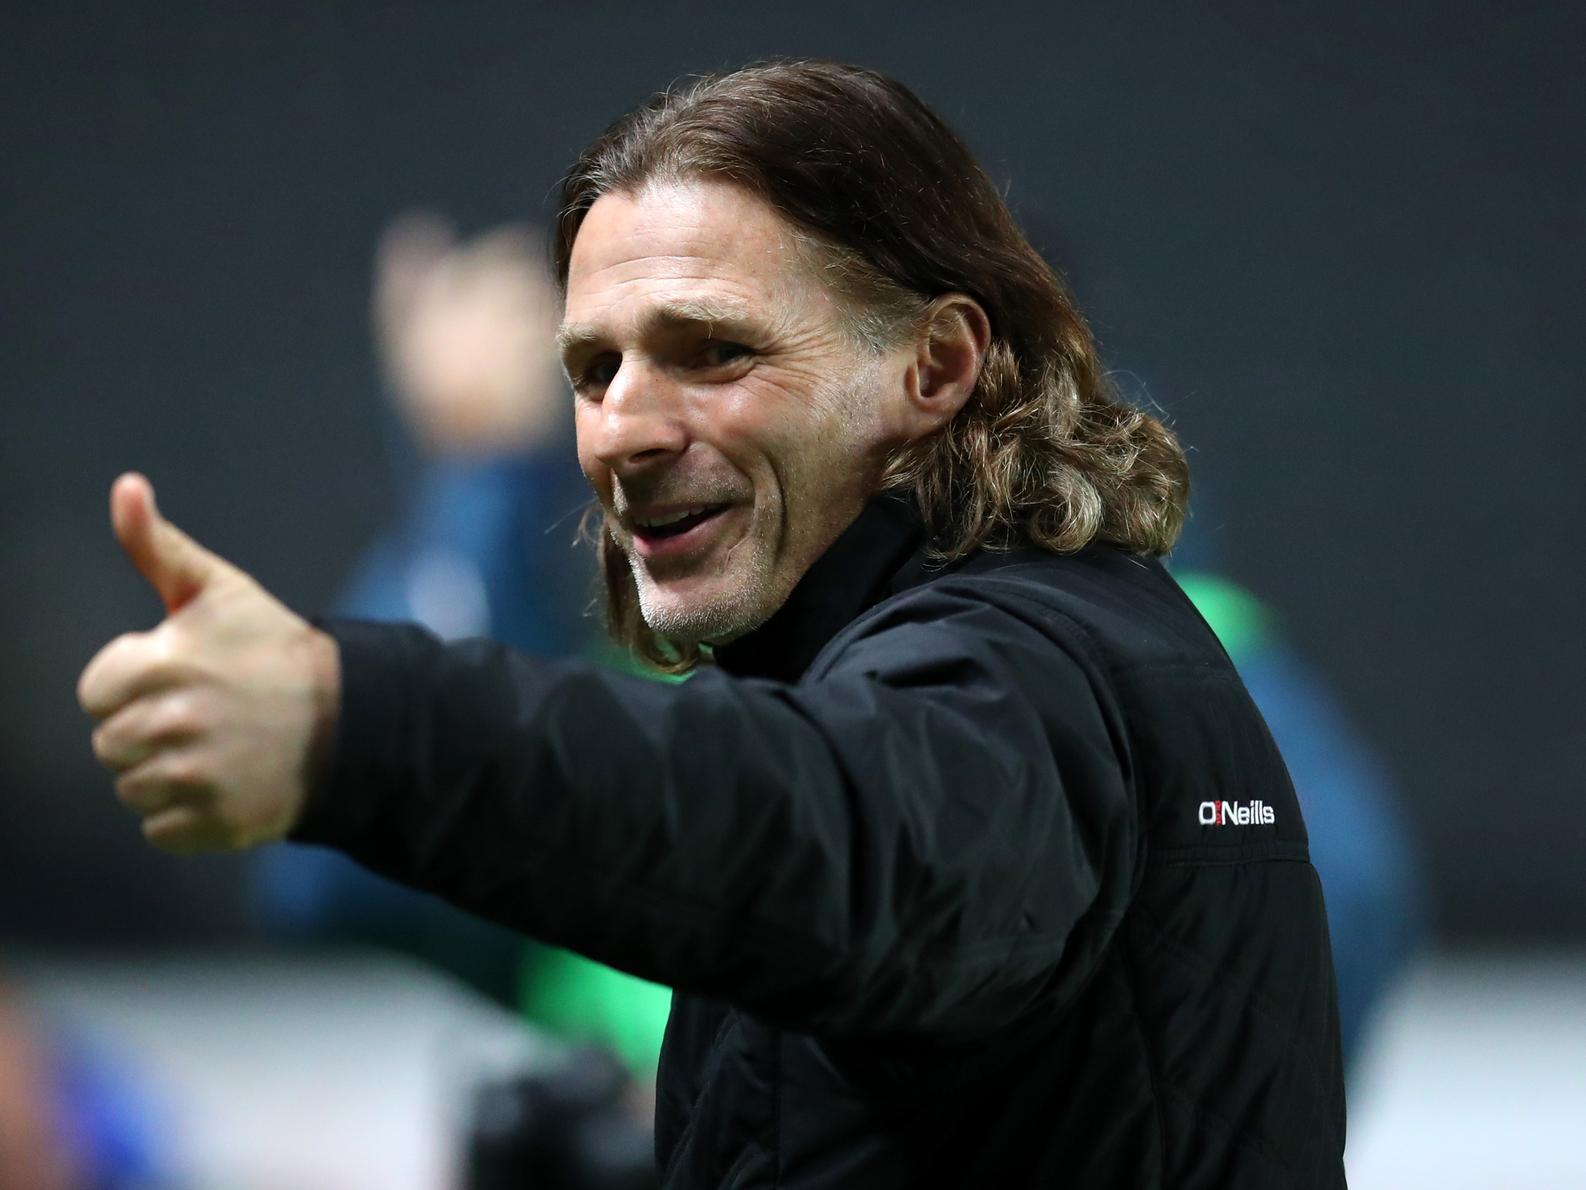 Queens Park Rangers, who have gone seven matches without a win, are rumoured to be close to sacking Mark Warbuton, with Wycombe boss Gareth Ainsworth a potential replacement. (Football League World)